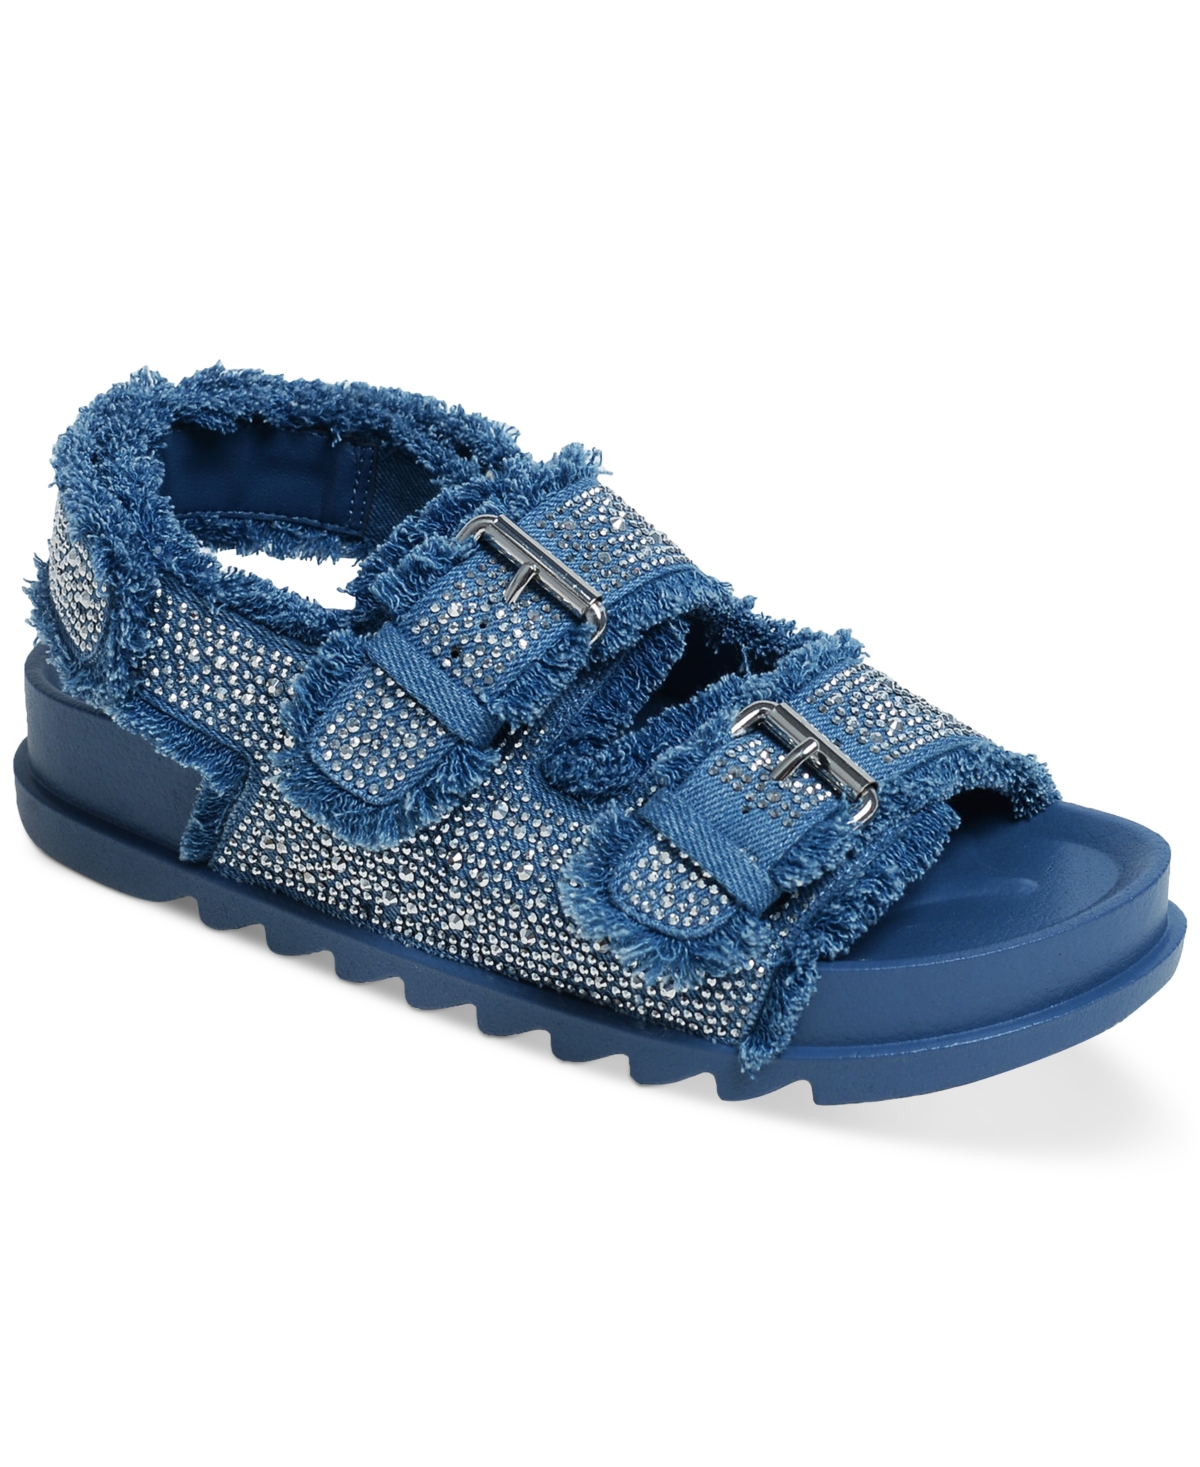 Wild Pair Mystick Buckled Flat Slingback Sandals, Created For Macy's In Denim Bling